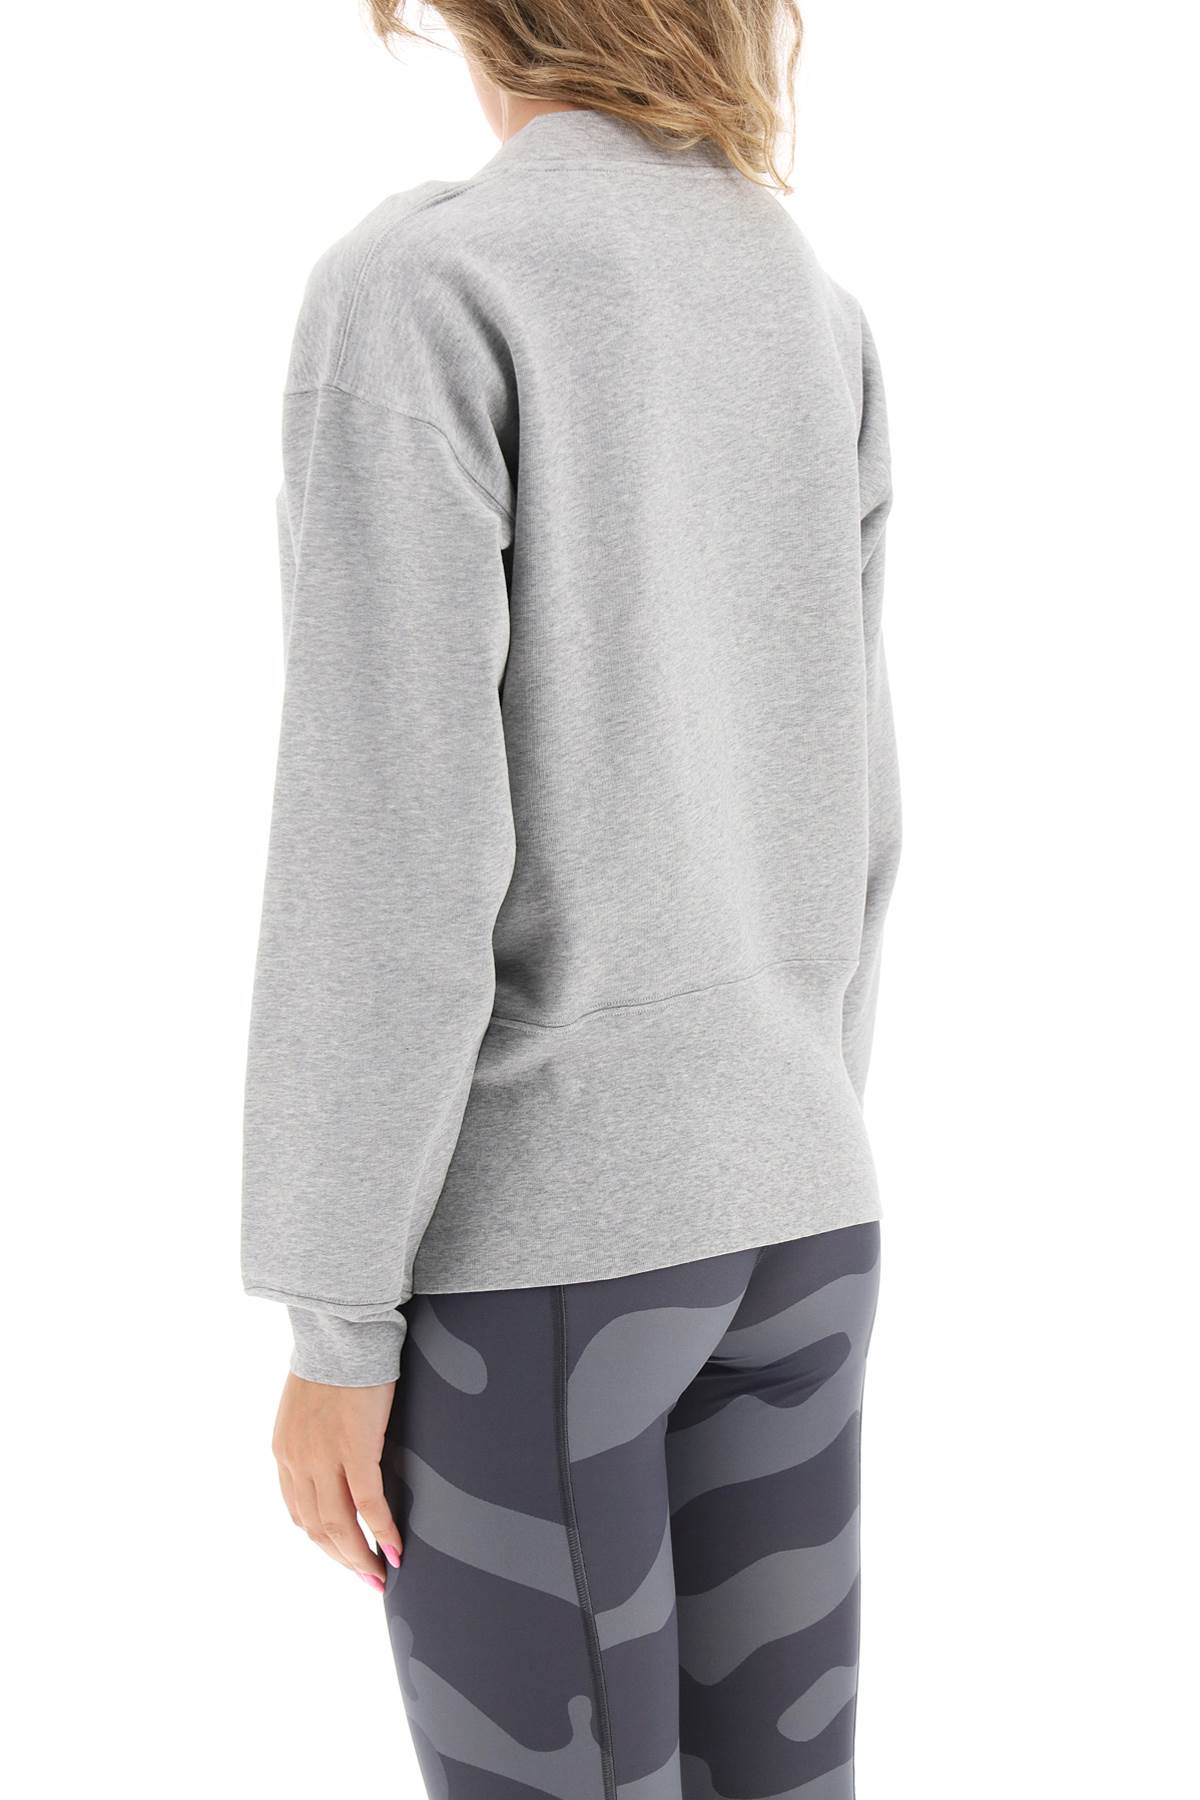 Shop Moncler X Salehe Bembury Sweater With Cut-outs In Grey